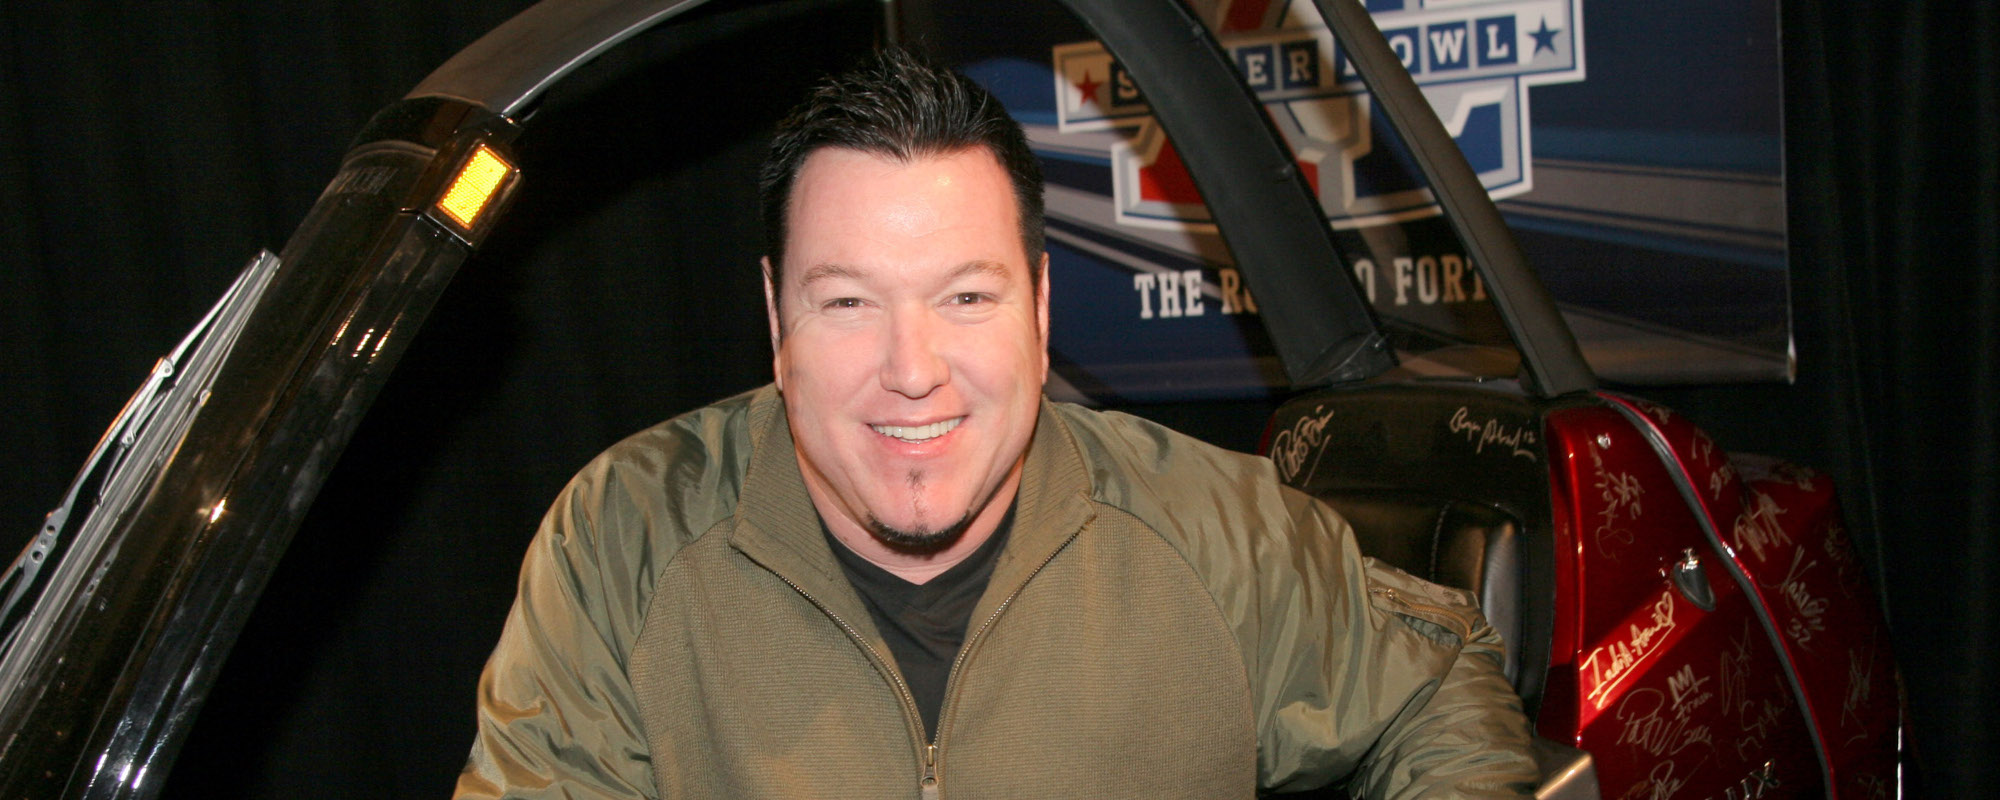 5 Things to Know About Smash Mouth’s Steve Harwell